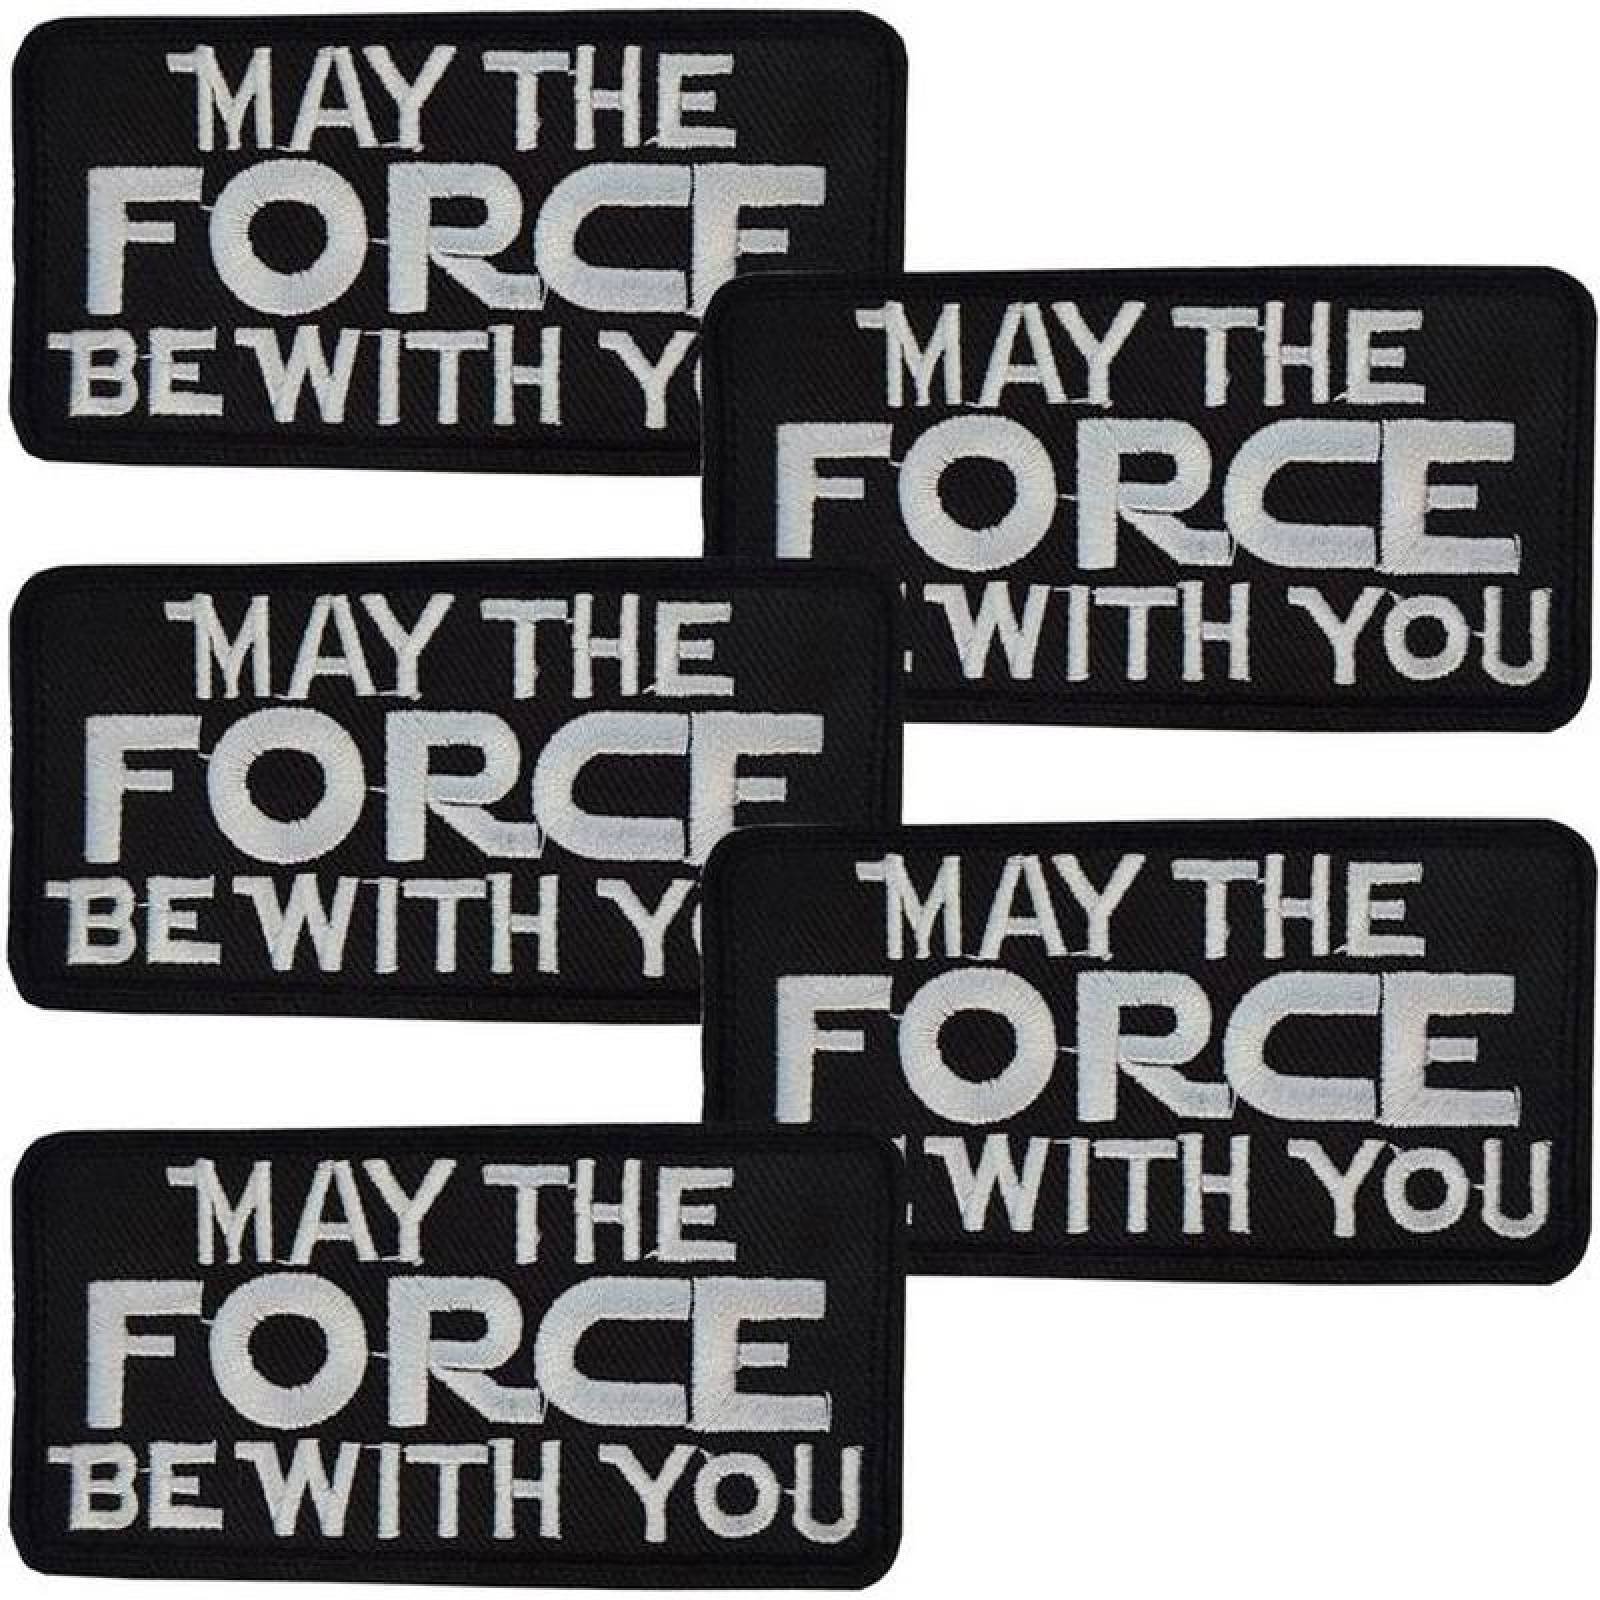 Termoadhesivo Parche para Ropa MXFOC-005-6 5 Parches May the force be with  you 10x5cm